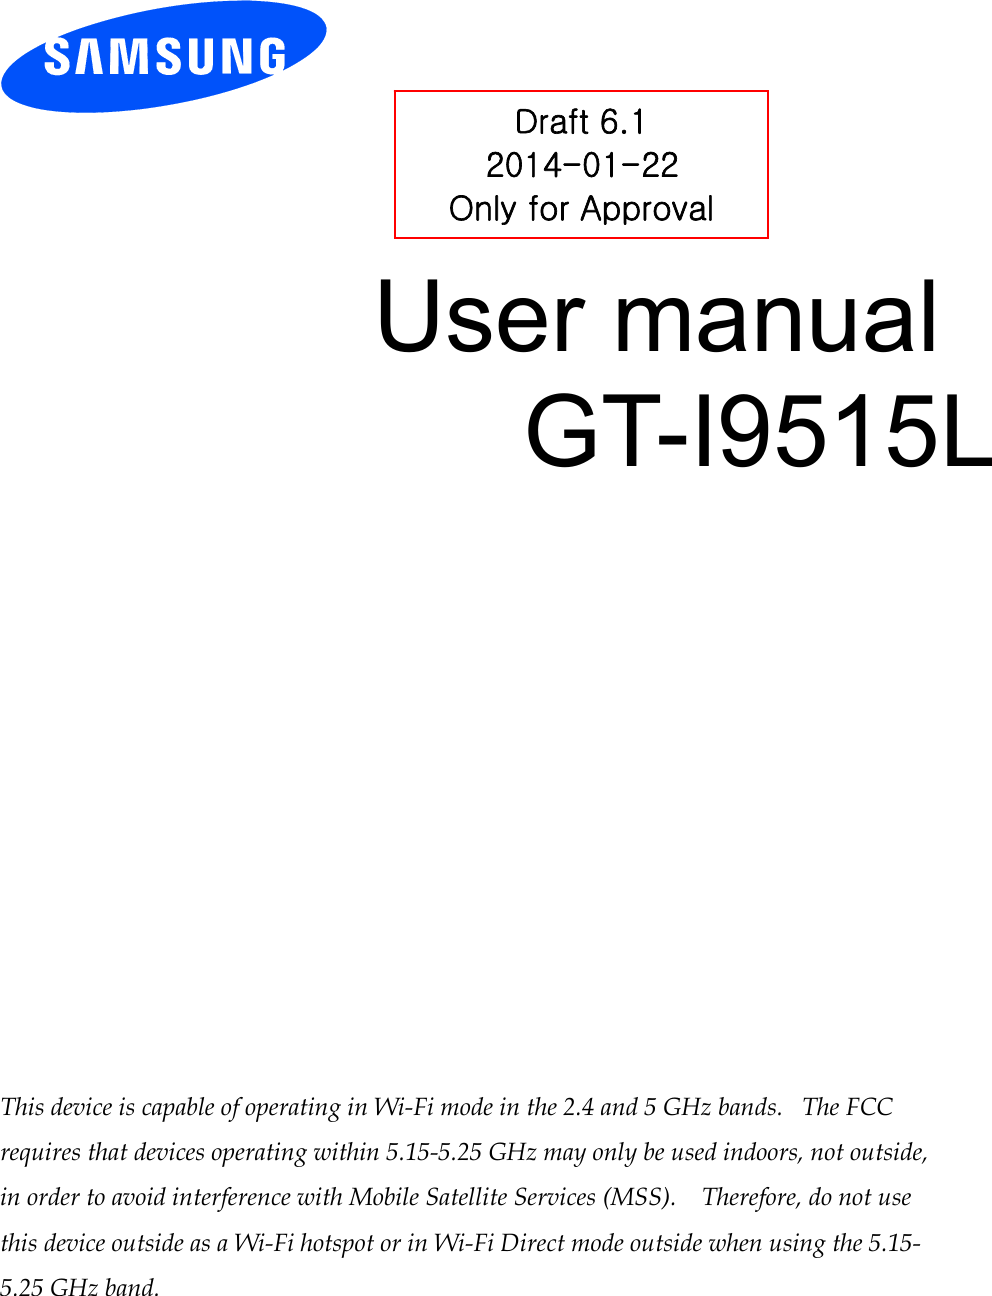          User manual GT-I9515L                 This device is capable of operating in Wi-Fi mode in the 2.4 and 5 GHz bands.   The FCC requires that devices operating within 5.15-5.25 GHz may only be used indoors, not outside, in order to avoid interference with Mobile Satellite Services (MSS).    Therefore, do not use this device outside as a Wi-Fi hotspot or in Wi-Fi Direct mode outside when using the 5.15-5.25 GHz band.  Draft 6.1 2014-01-22 Only for Approval 